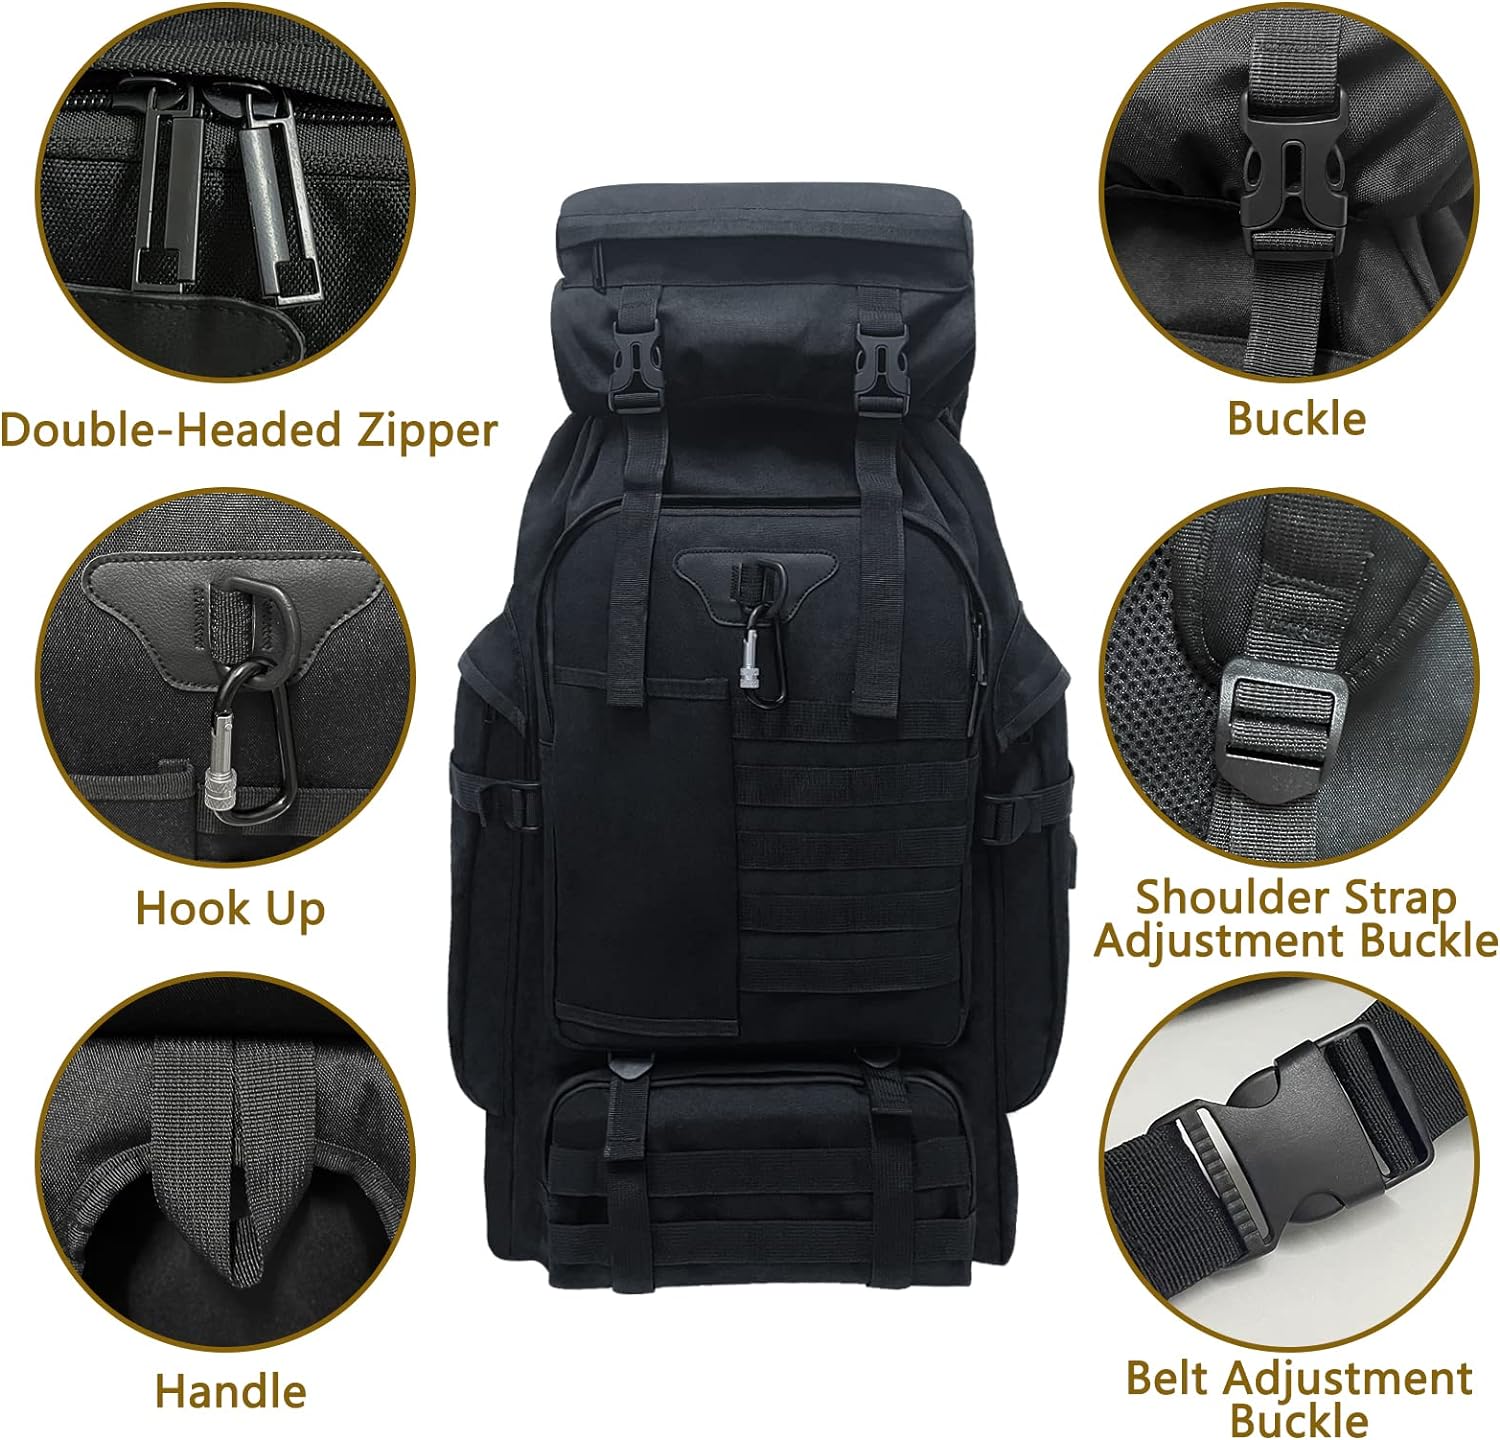 Lizbin Hiking Backpack, 80L Camping Hiking Backpack, Military Tactical Backpack Molle Rucksack, Extra Large Hiking Daypack with USB Charging Port, Water Resistant Outdoor Sports Backpack (Black)